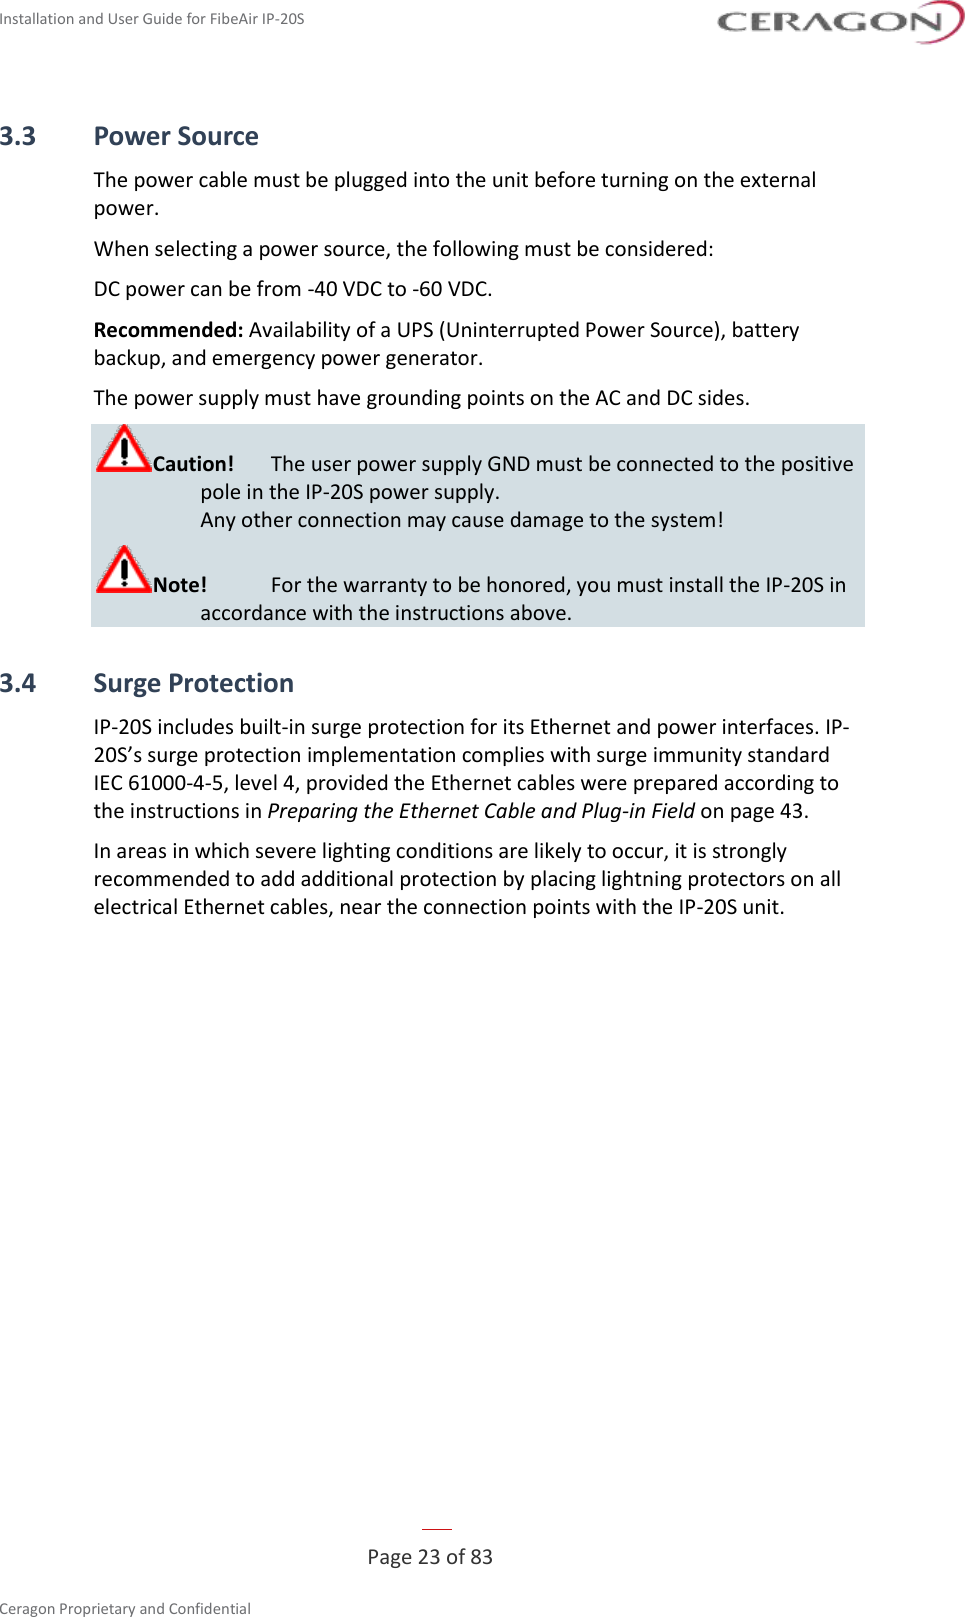 Installation and User Guide for FibeAir IP-20S   Page 23 of 83  Ceragon Proprietary and Confidential     3.3 Power Source The power cable must be plugged into the unit before turning on the external power. When selecting a power source, the following must be considered: DC power can be from -40 VDC to -60 VDC. Recommended: Availability of a UPS (Uninterrupted Power Source), battery backup, and emergency power generator. The power supply must have grounding points on the AC and DC sides. Caution!  The user power supply GND must be connected to the positive pole in the IP-20S power supply.  Any other connection may cause damage to the system! Note!  For the warranty to be honored, you must install the IP-20S in accordance with the instructions above. 3.4 Surge Protection IP-20S includes built-in surge protection for its Ethernet and power interfaces. IP-20S’s surge protection implementation complies with surge immunity standard IEC 61000-4-5, level 4, provided the Ethernet cables were prepared according to the instructions in Preparing the Ethernet Cable and Plug-in Field on page 43. In areas in which severe lighting conditions are likely to occur, it is strongly recommended to add additional protection by placing lightning protectors on all electrical Ethernet cables, near the connection points with the IP-20S unit.   